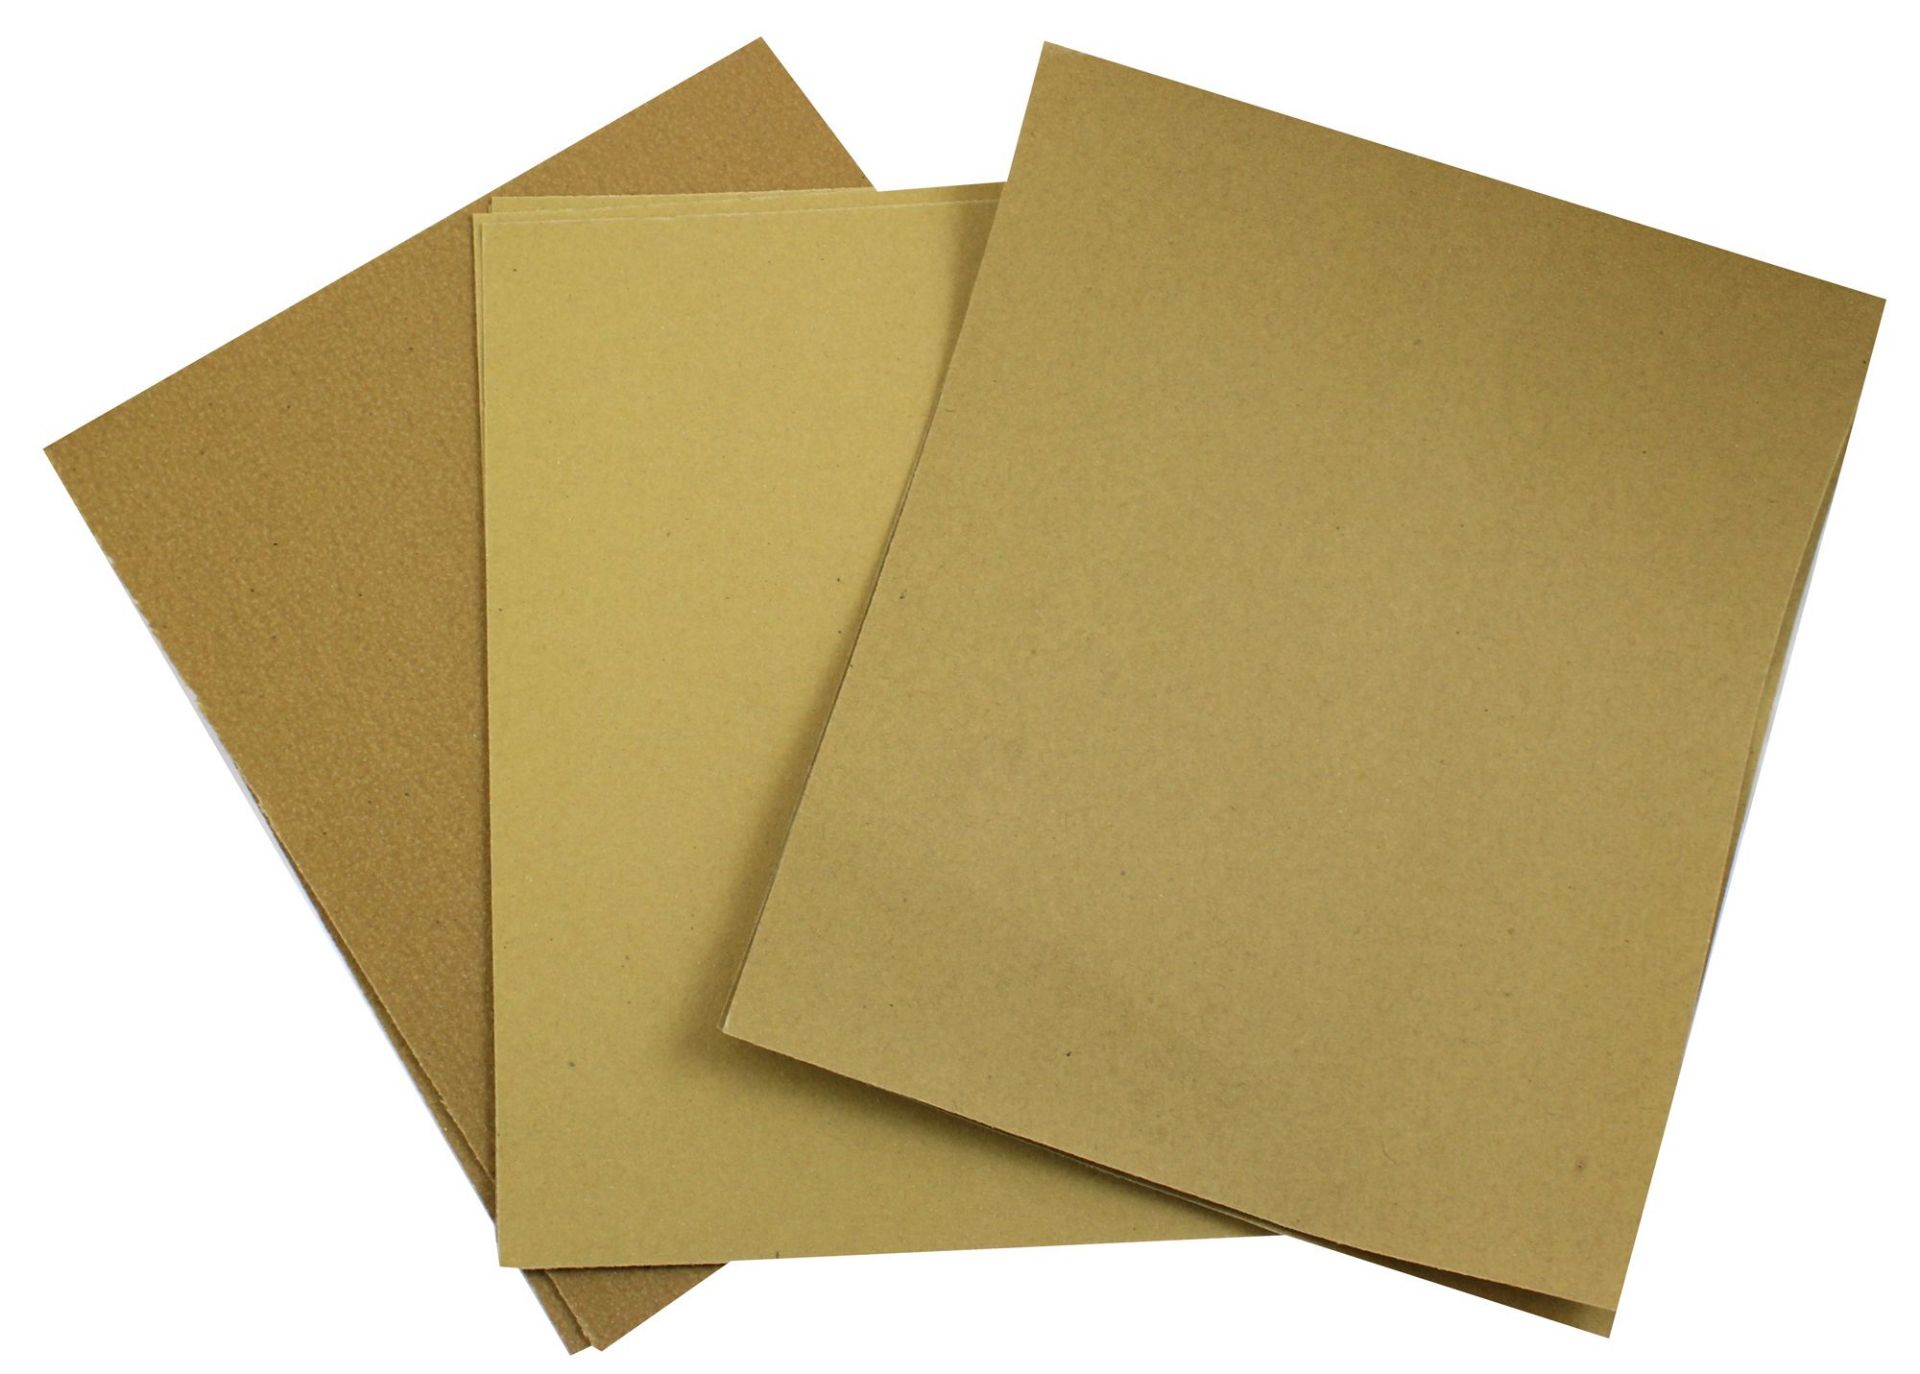 x2 Packs Of 10 Sheets Assorted Sandpaper Sheets (20 Sheets Total) - Image 2 of 2